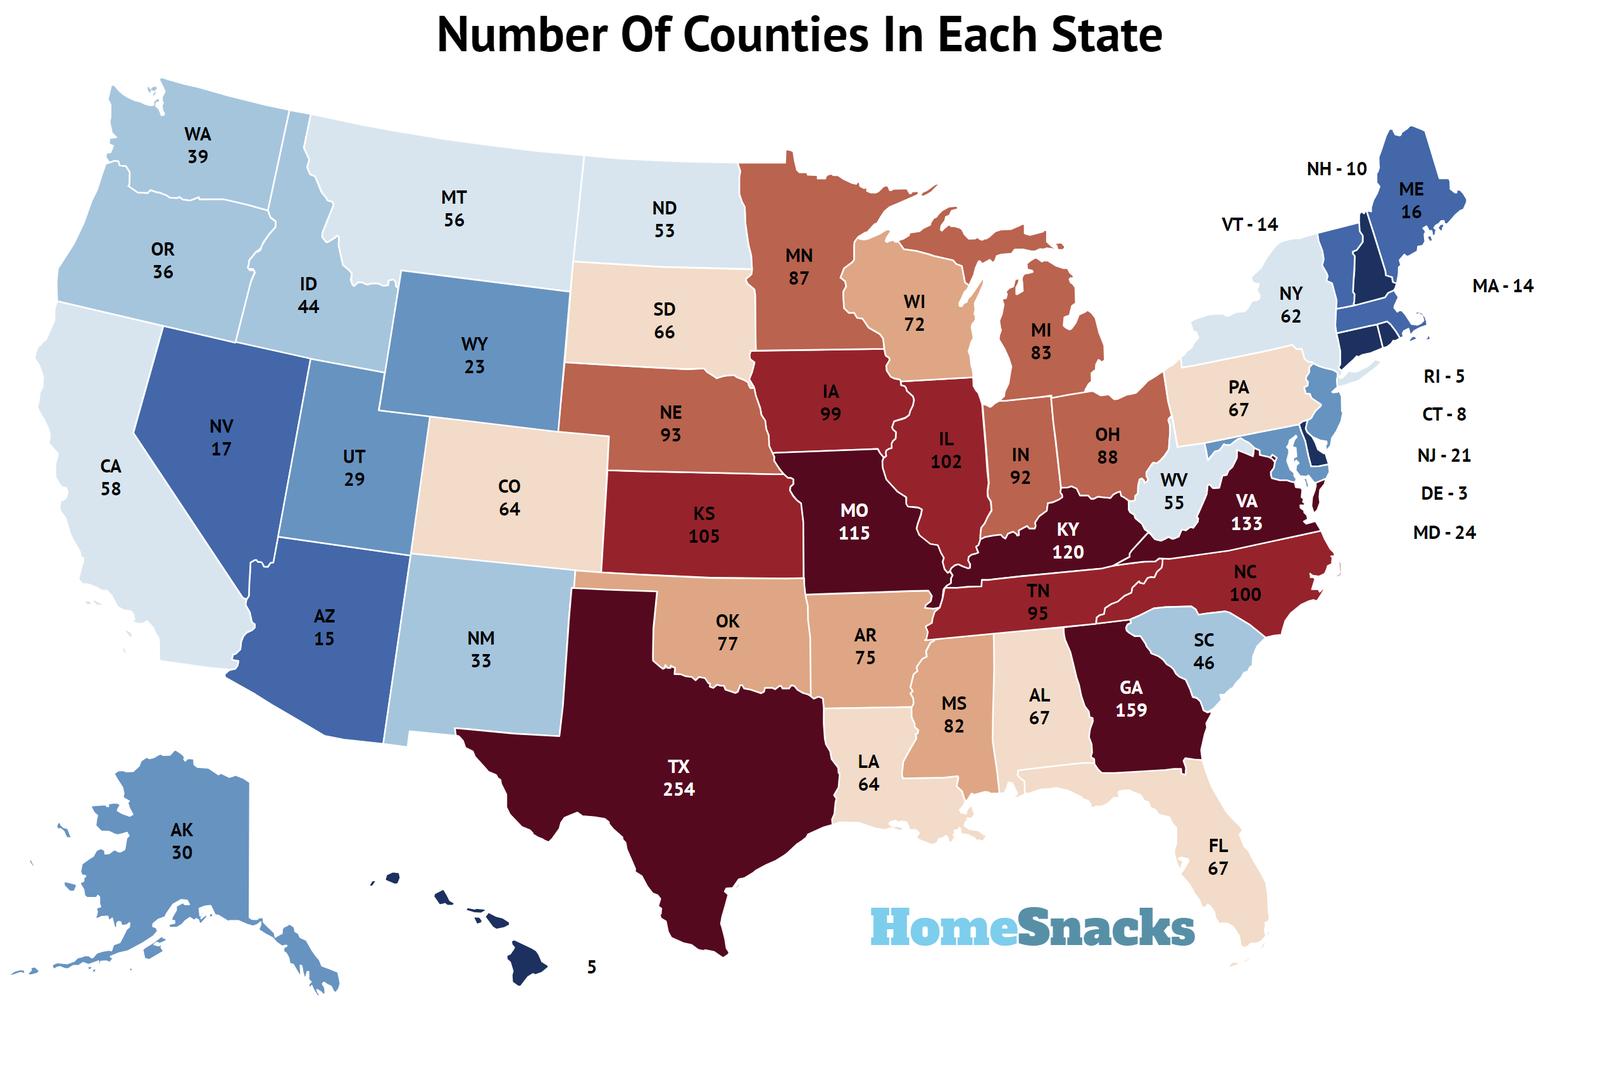 Number Of Counties In Each State